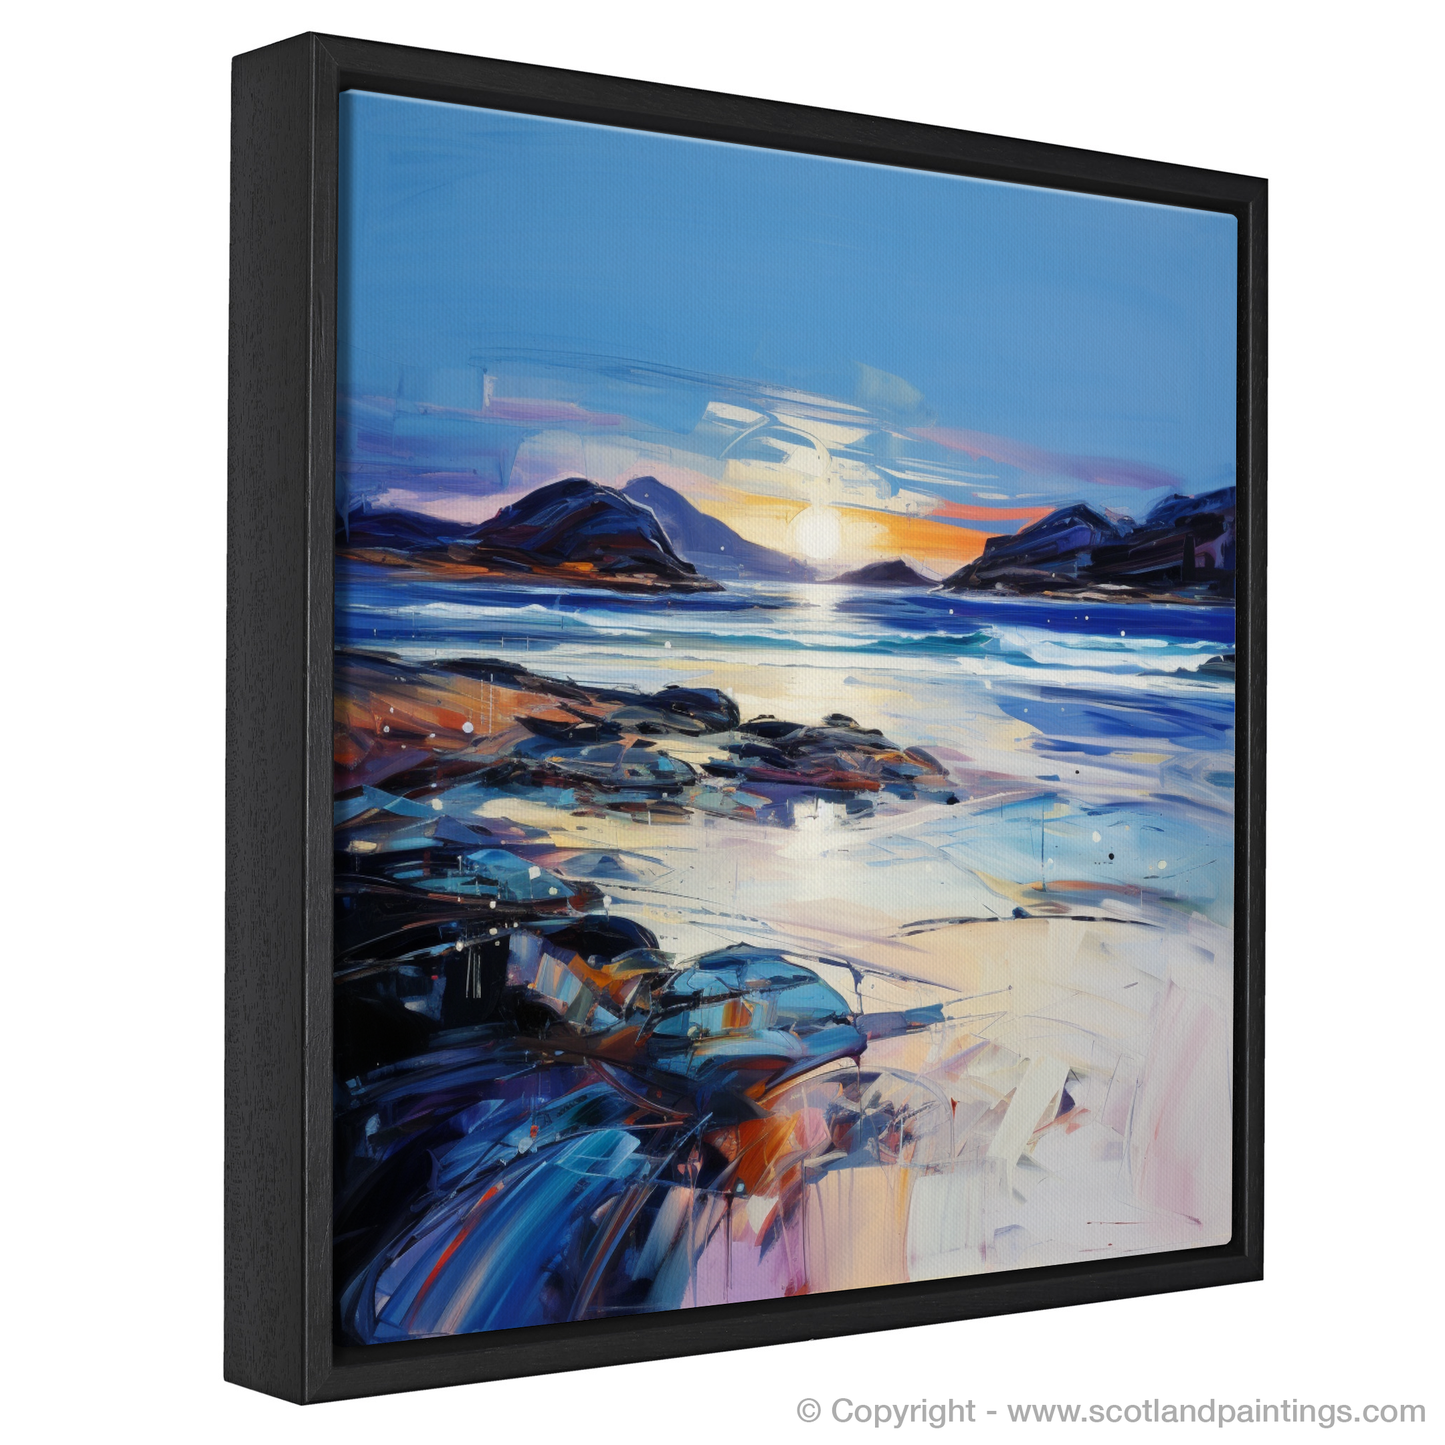 Painting and Art Print of Traigh Mhor at dusk entitled "Dusk at Traigh Mhor: An Expressionist Ode to Scottish Coves".